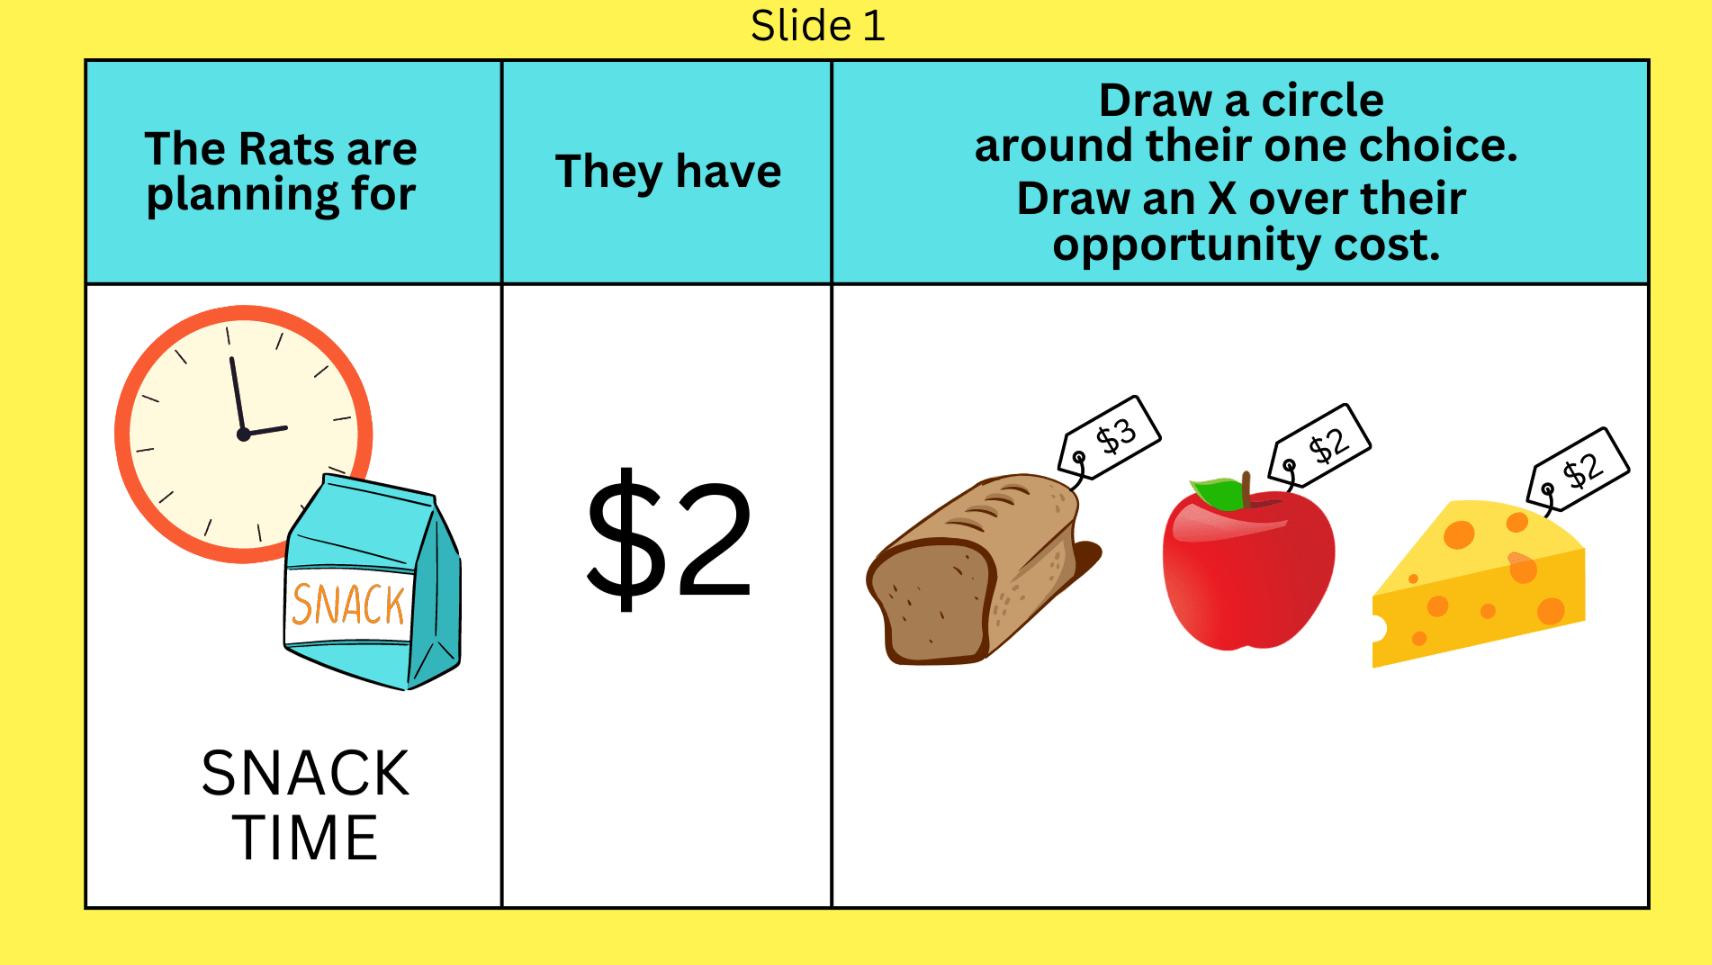 Shorter interactive lesson on opportunity cost